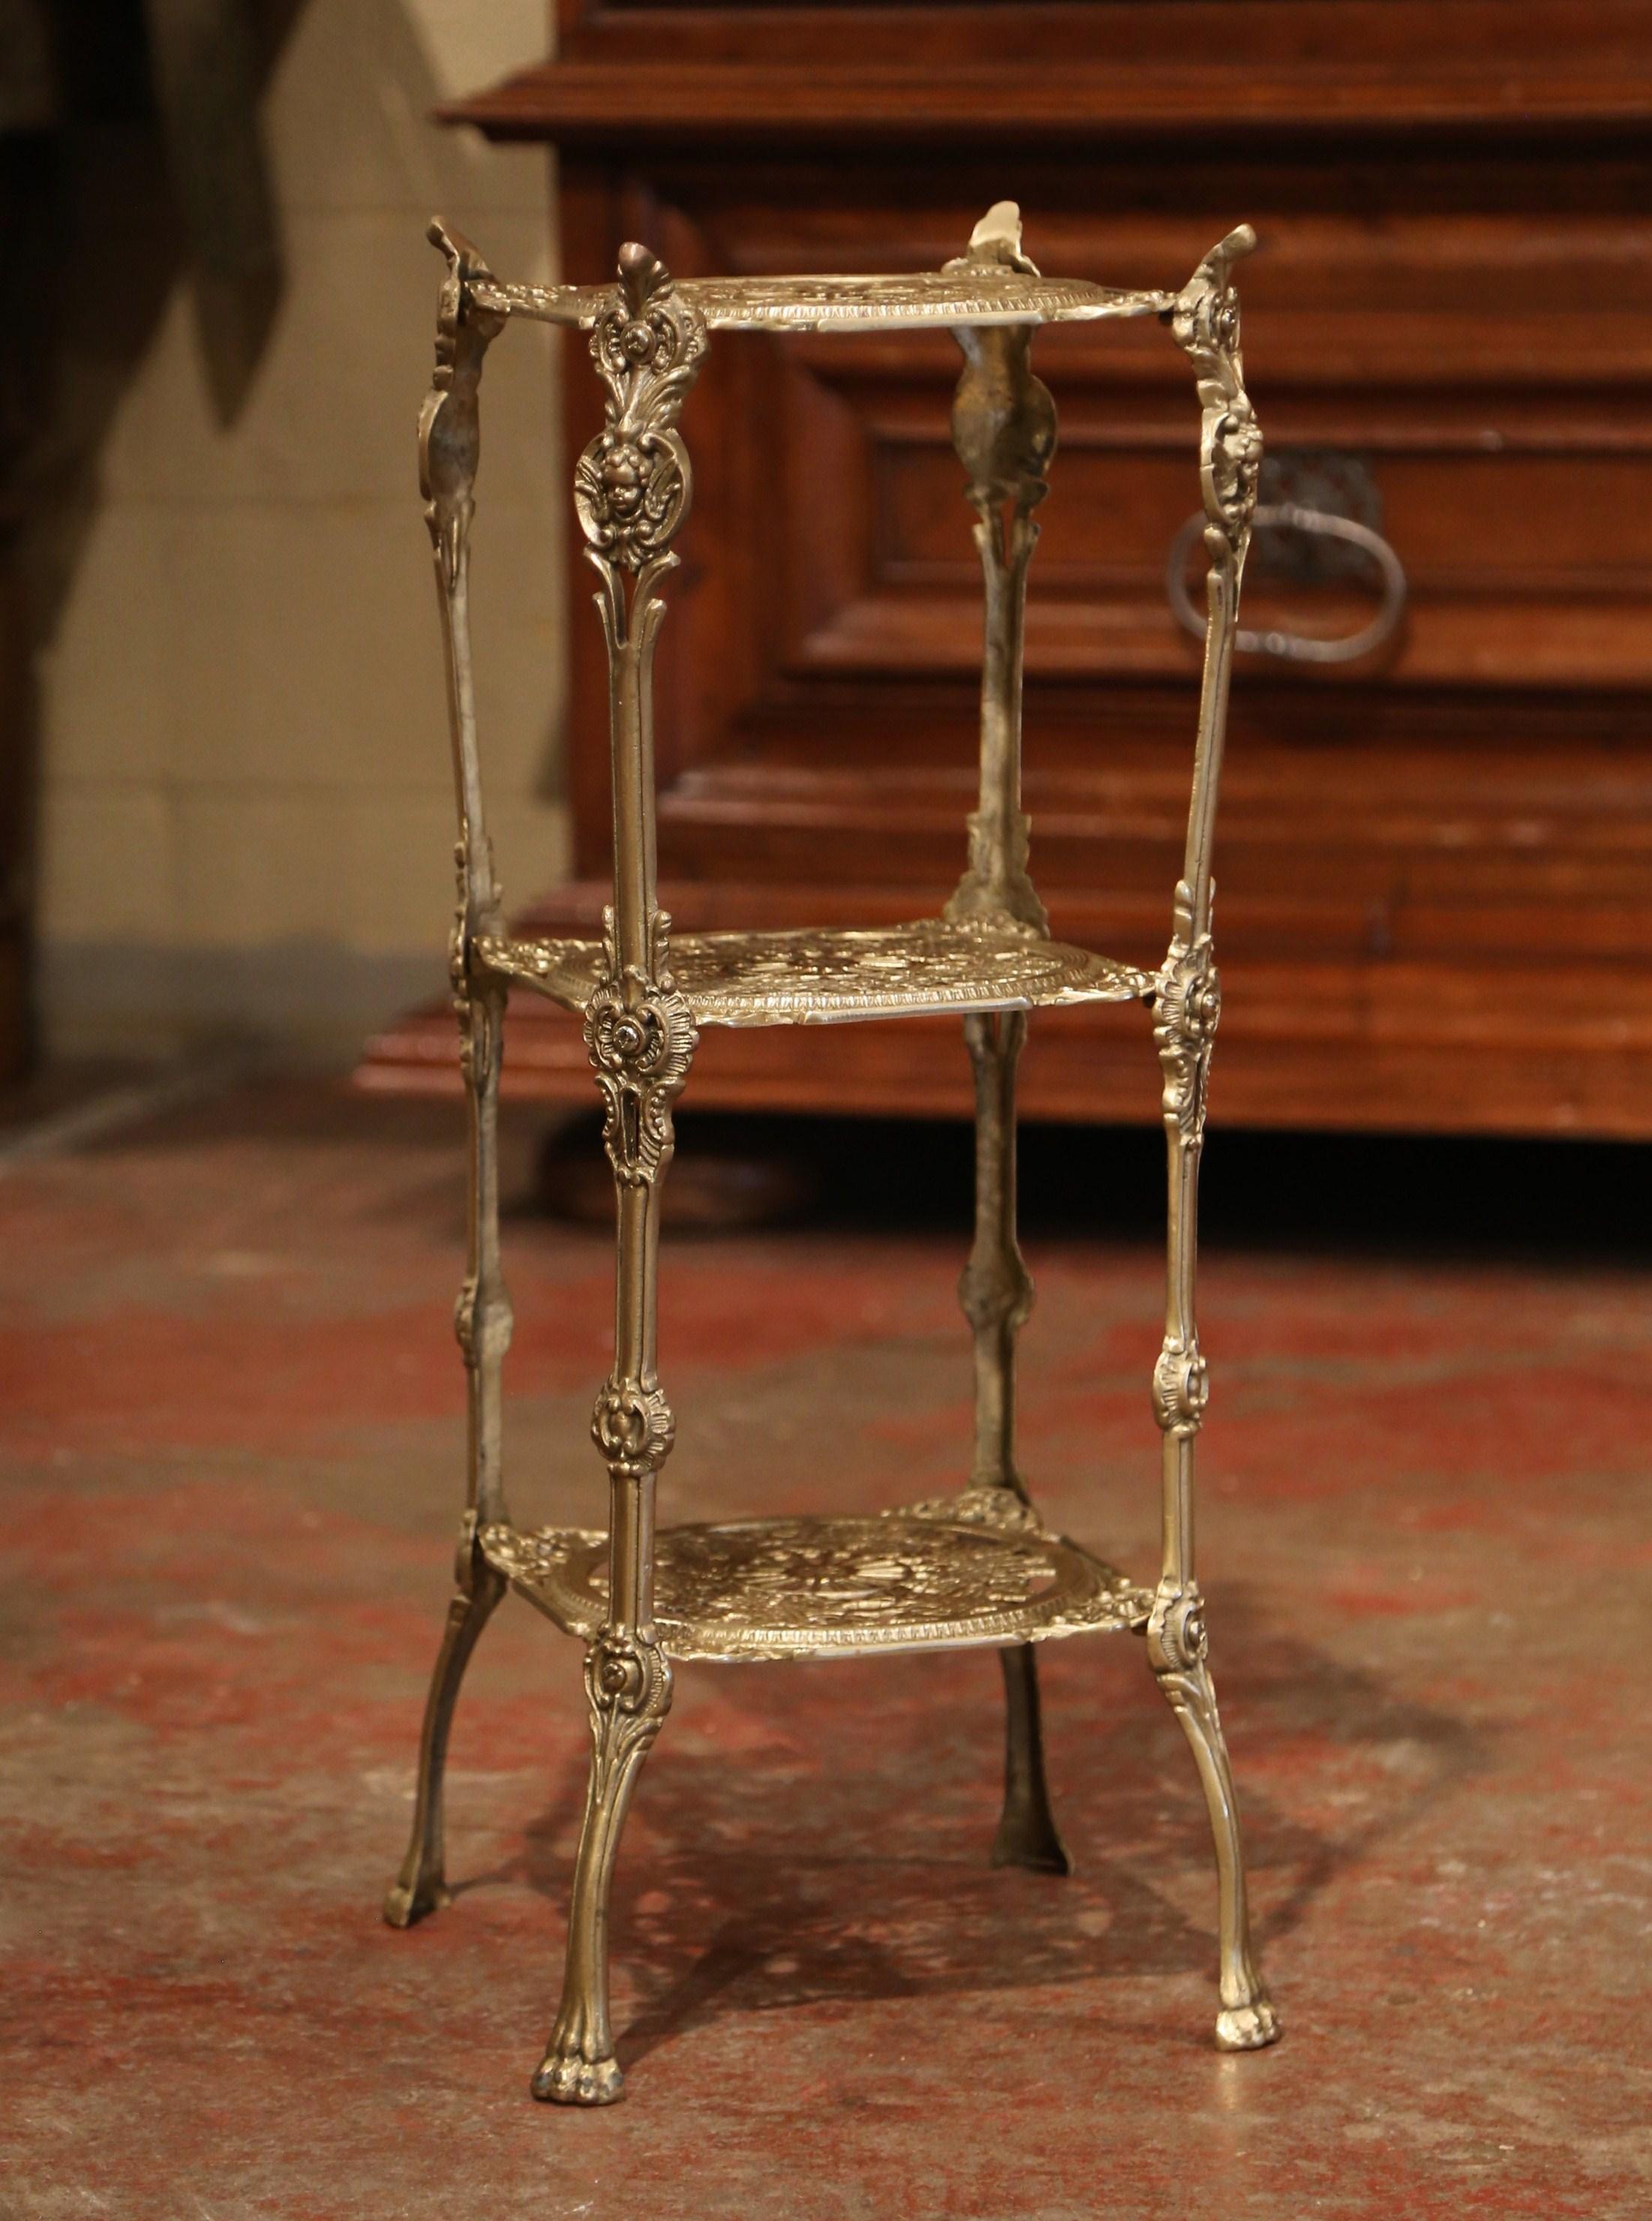 Decorate a powder room with this antique small table stand. Crafted in France circa 1950, the bronze table stands on four curved legs with paw feet at the base, and features three shelves decorated with pierced grape and vine motifs. The square